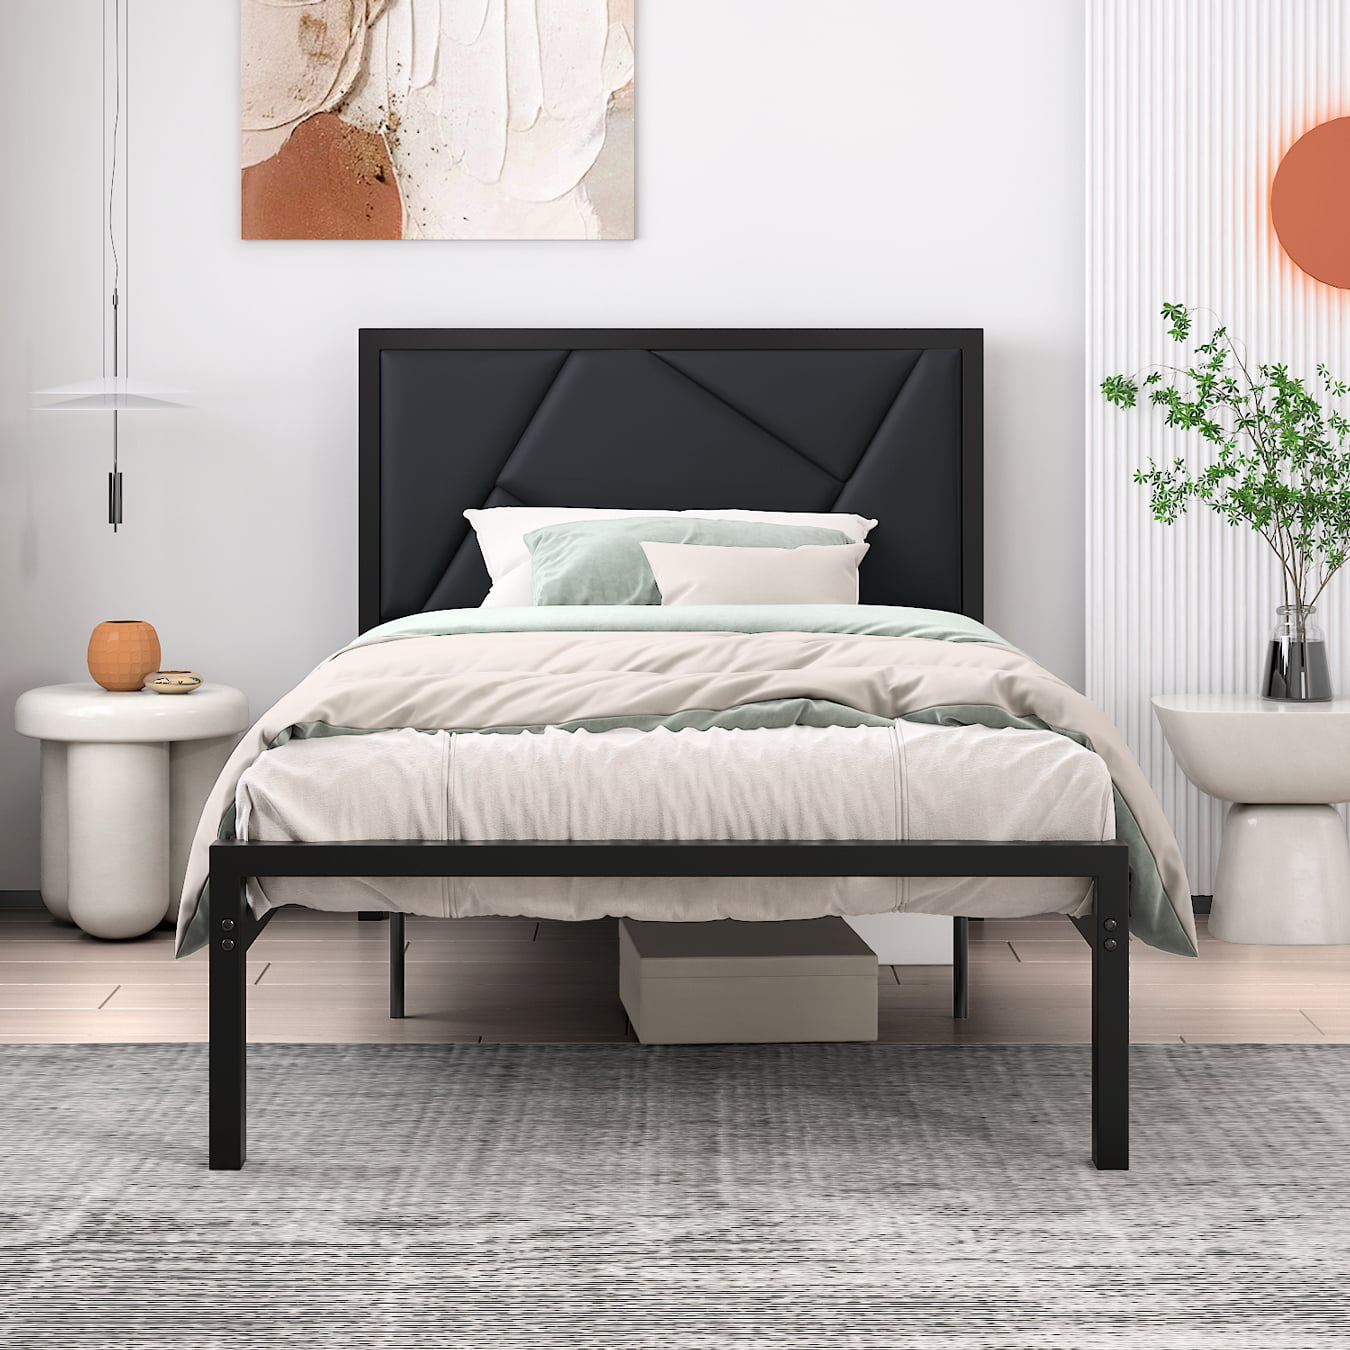 Amolife Twin Size Metal Bed Frame With, How To Attach Upholstered Headboard Metal Frame